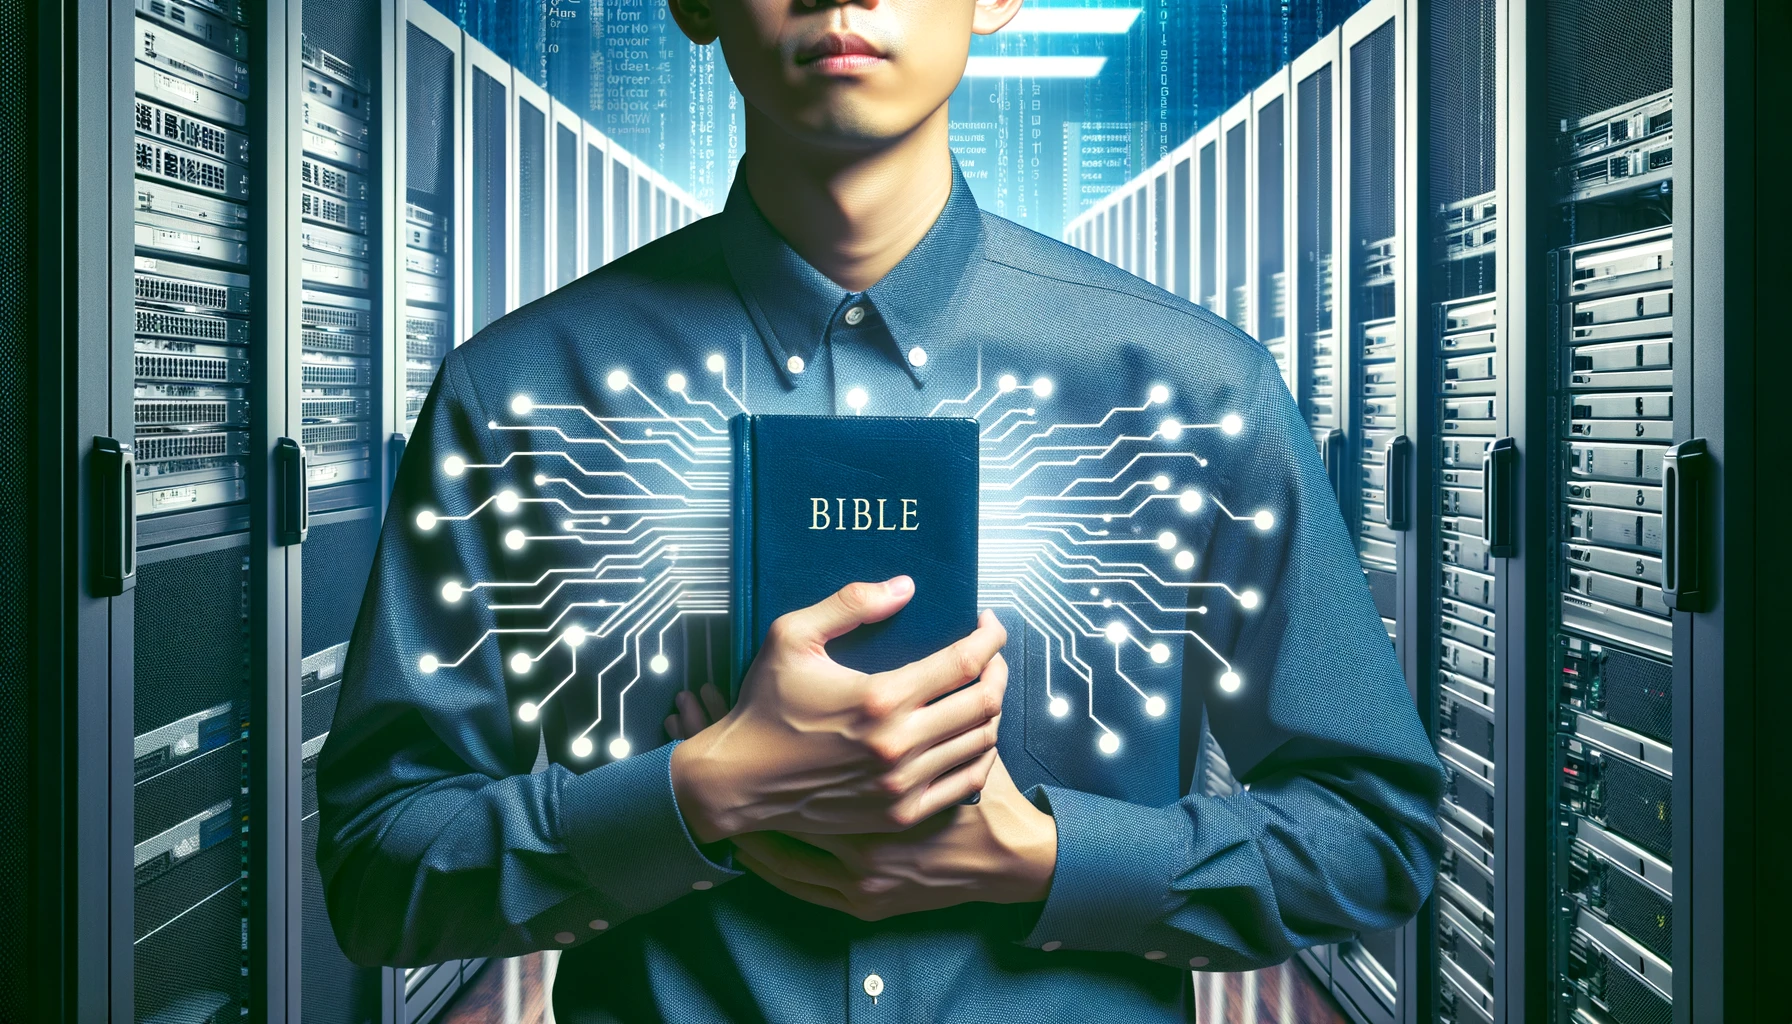 Image of a person holding a bible near computers